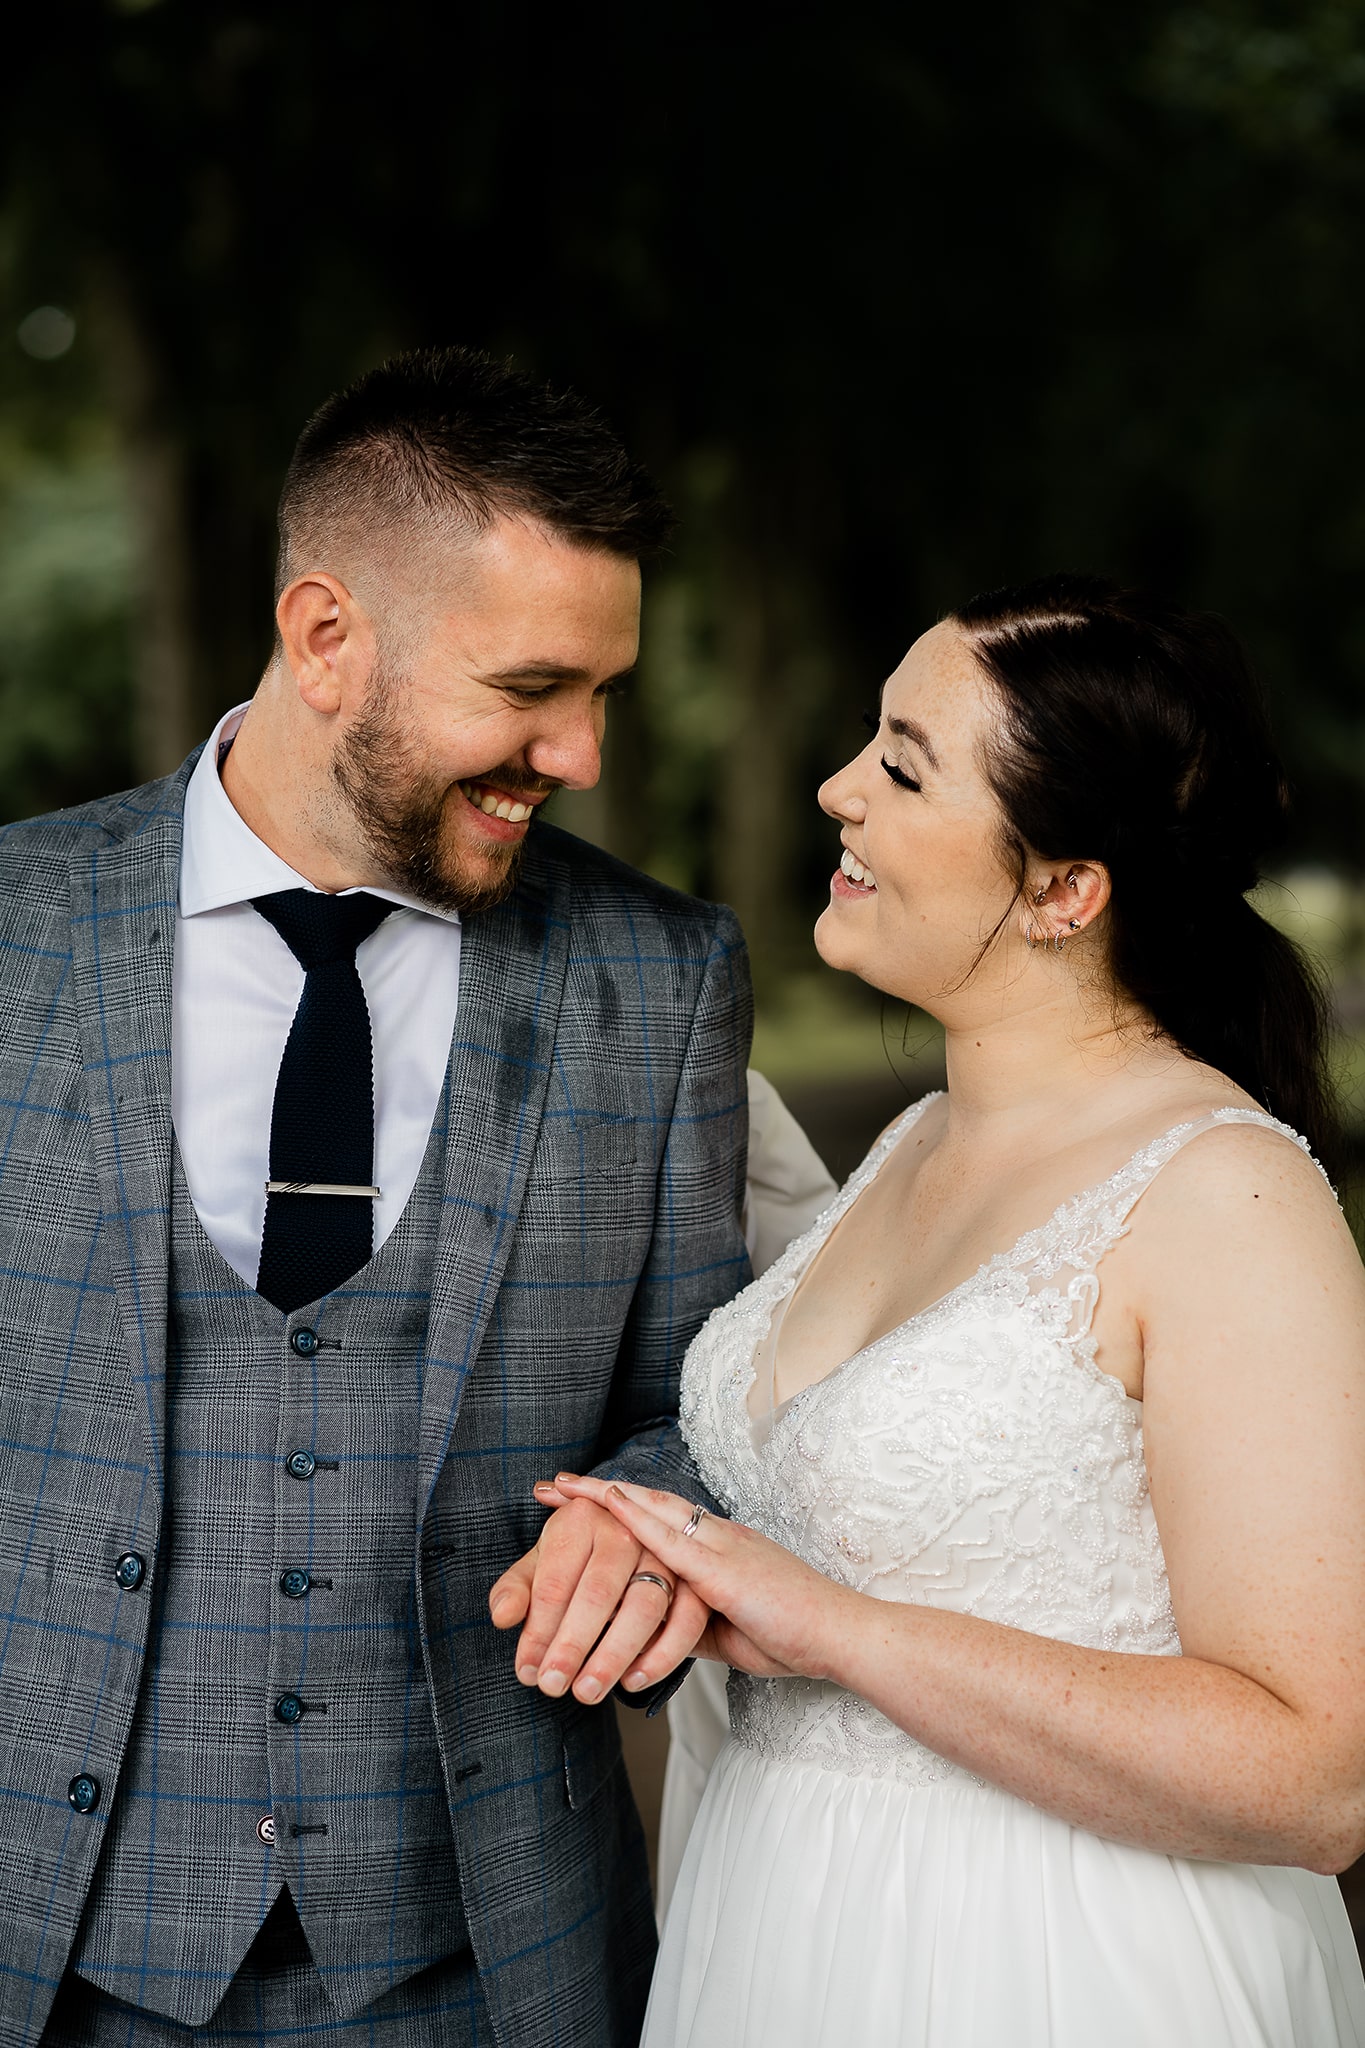 Wedding couple looking into each others eyes, smiling after slight rain